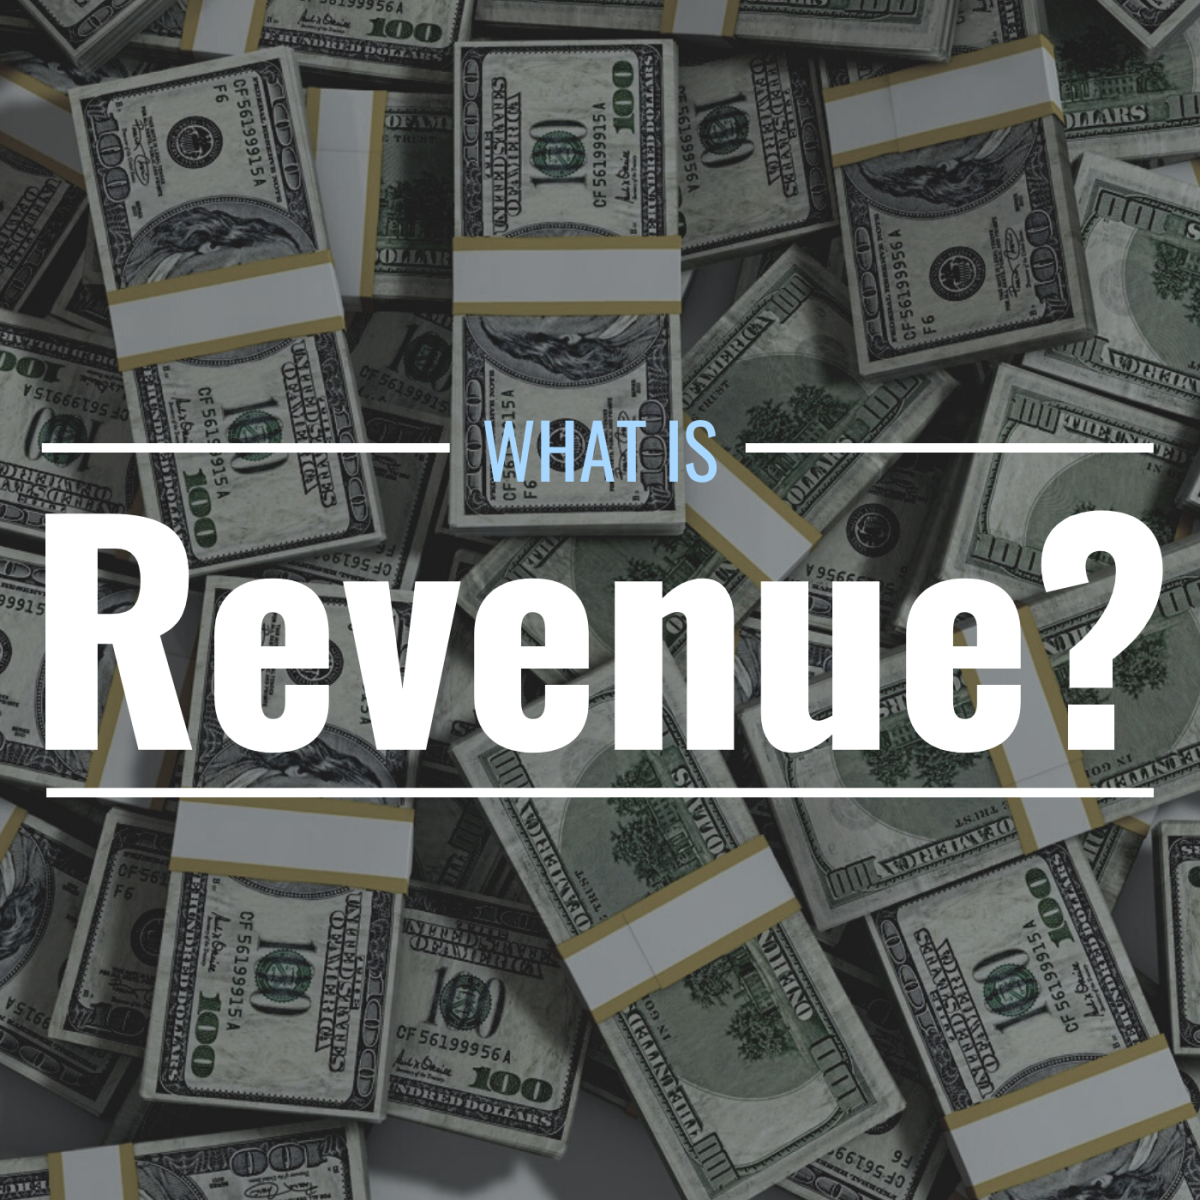 Photo of cash with text overlay that reads "What Is Revenue?"